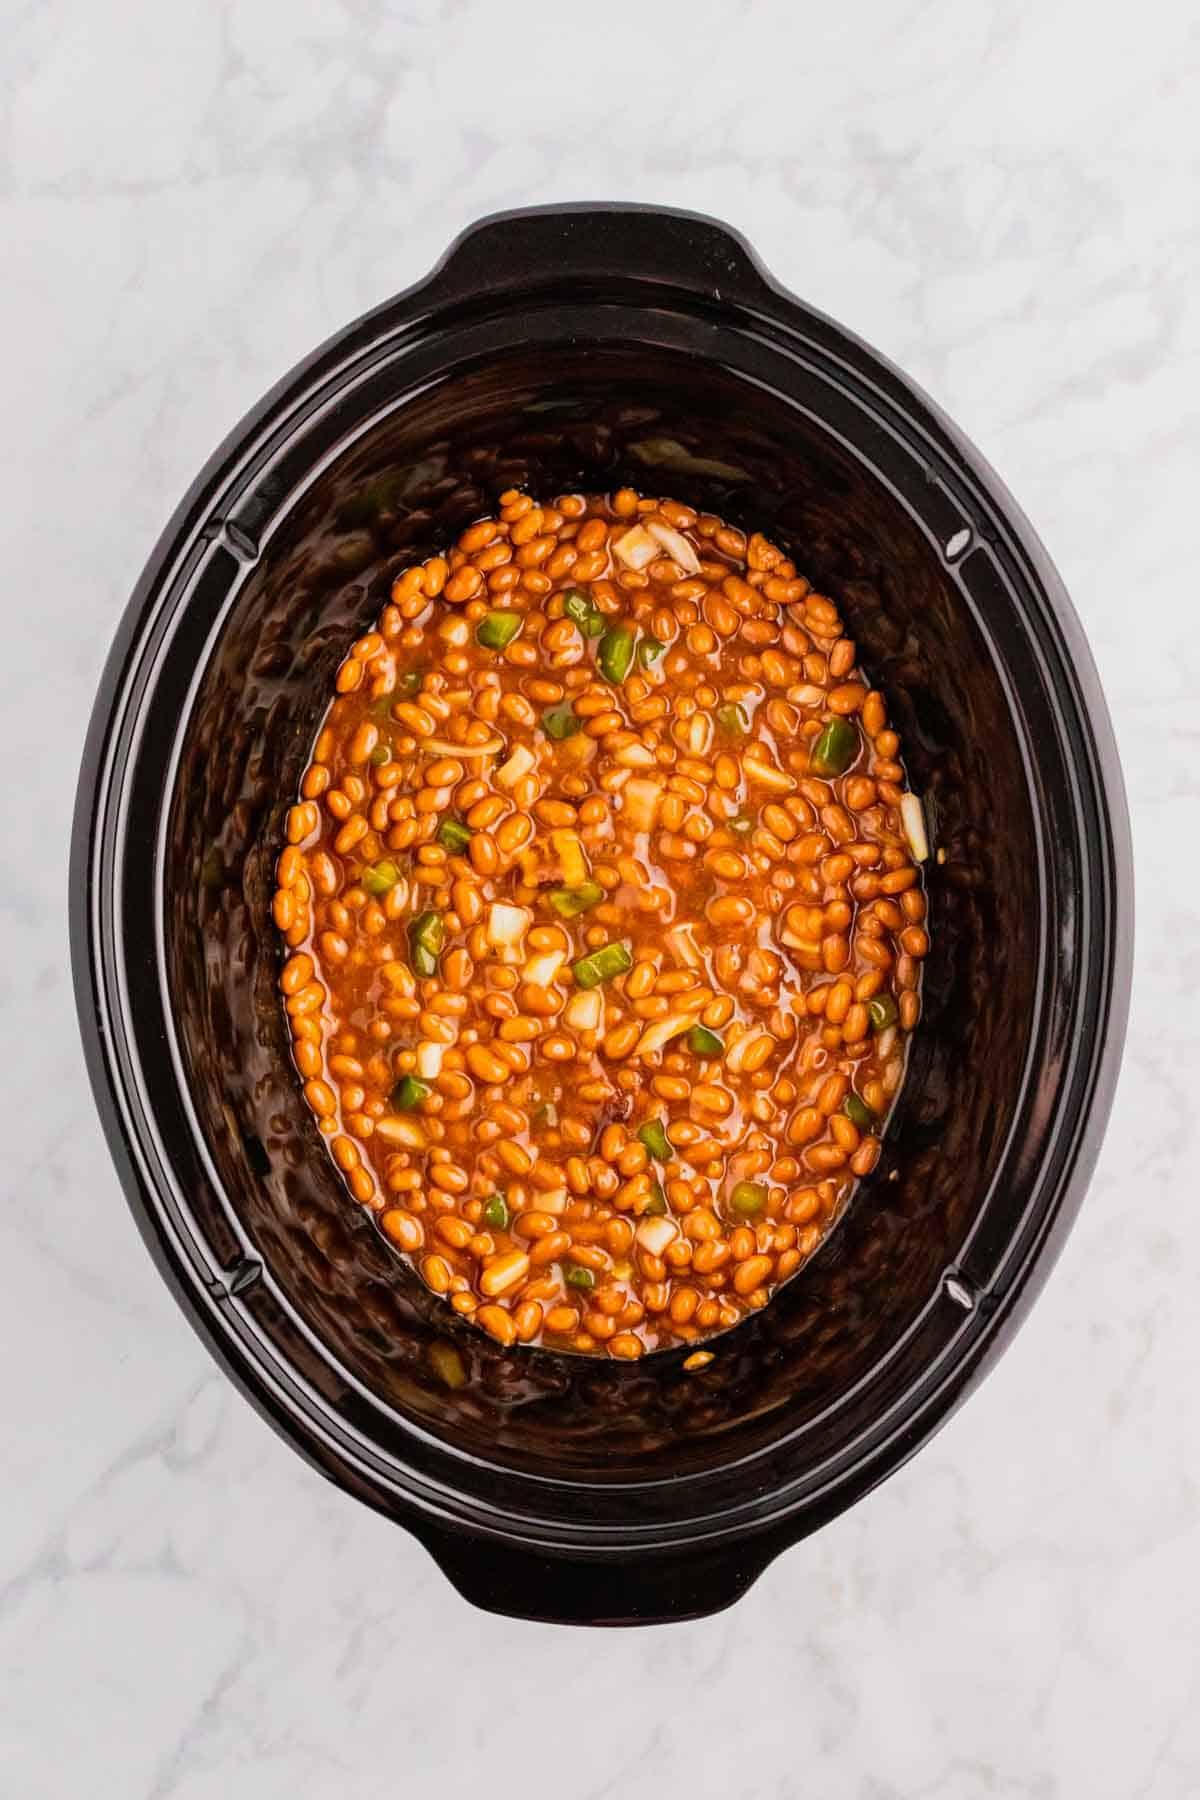 baked bean ingredients stirred together in a crock pot before cooking